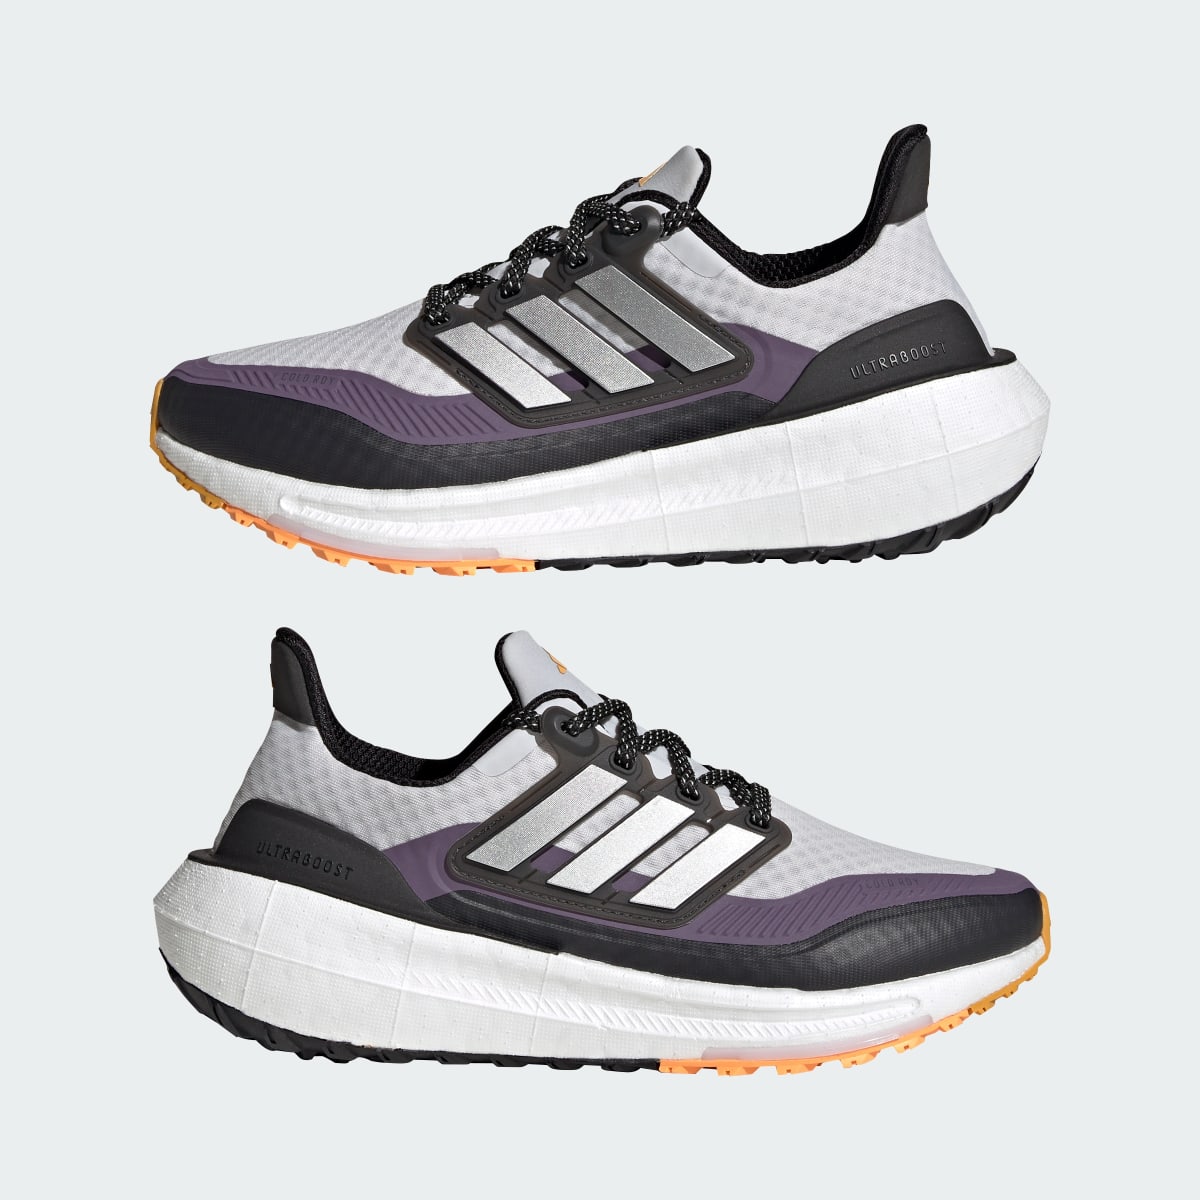 Adidas Ultraboost Light COLD.RDY 2.0 Shoes. 8